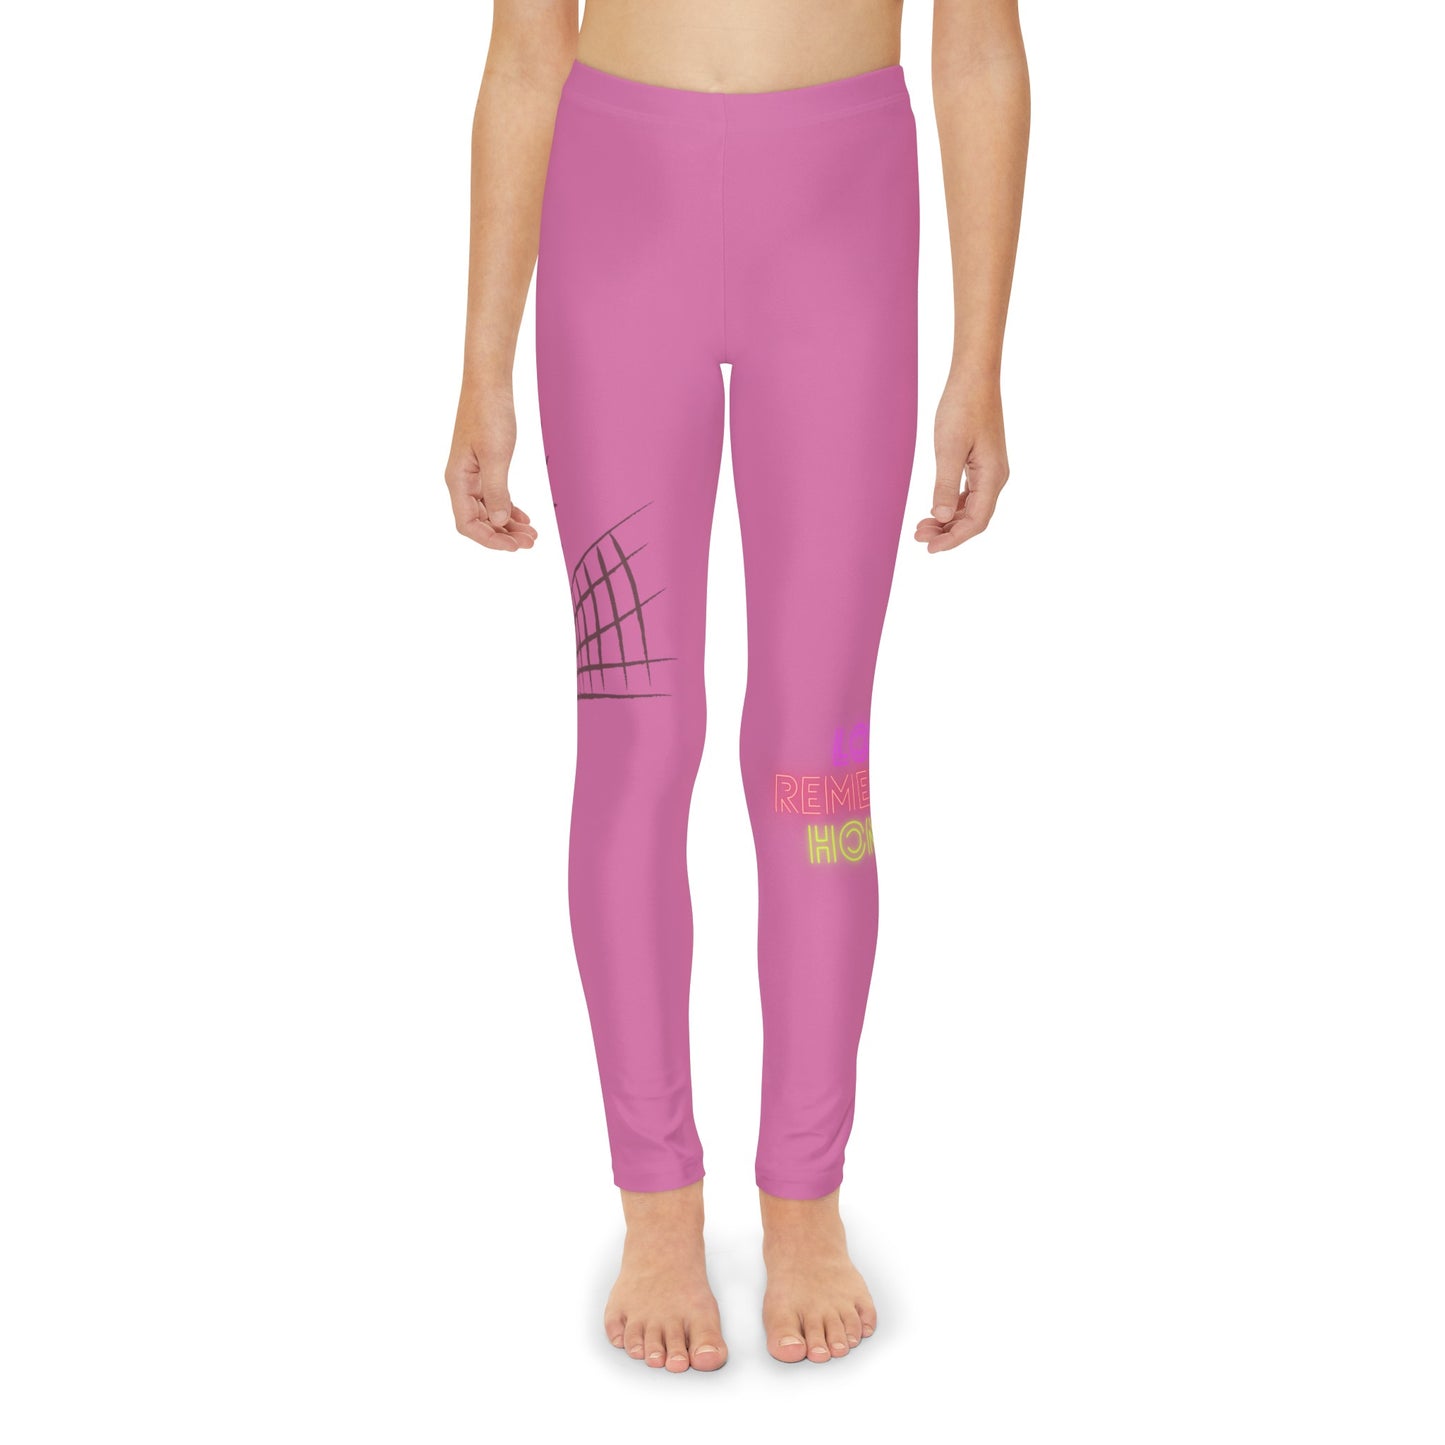 Youth Full-Length Leggings: Volleyball Lite Pink